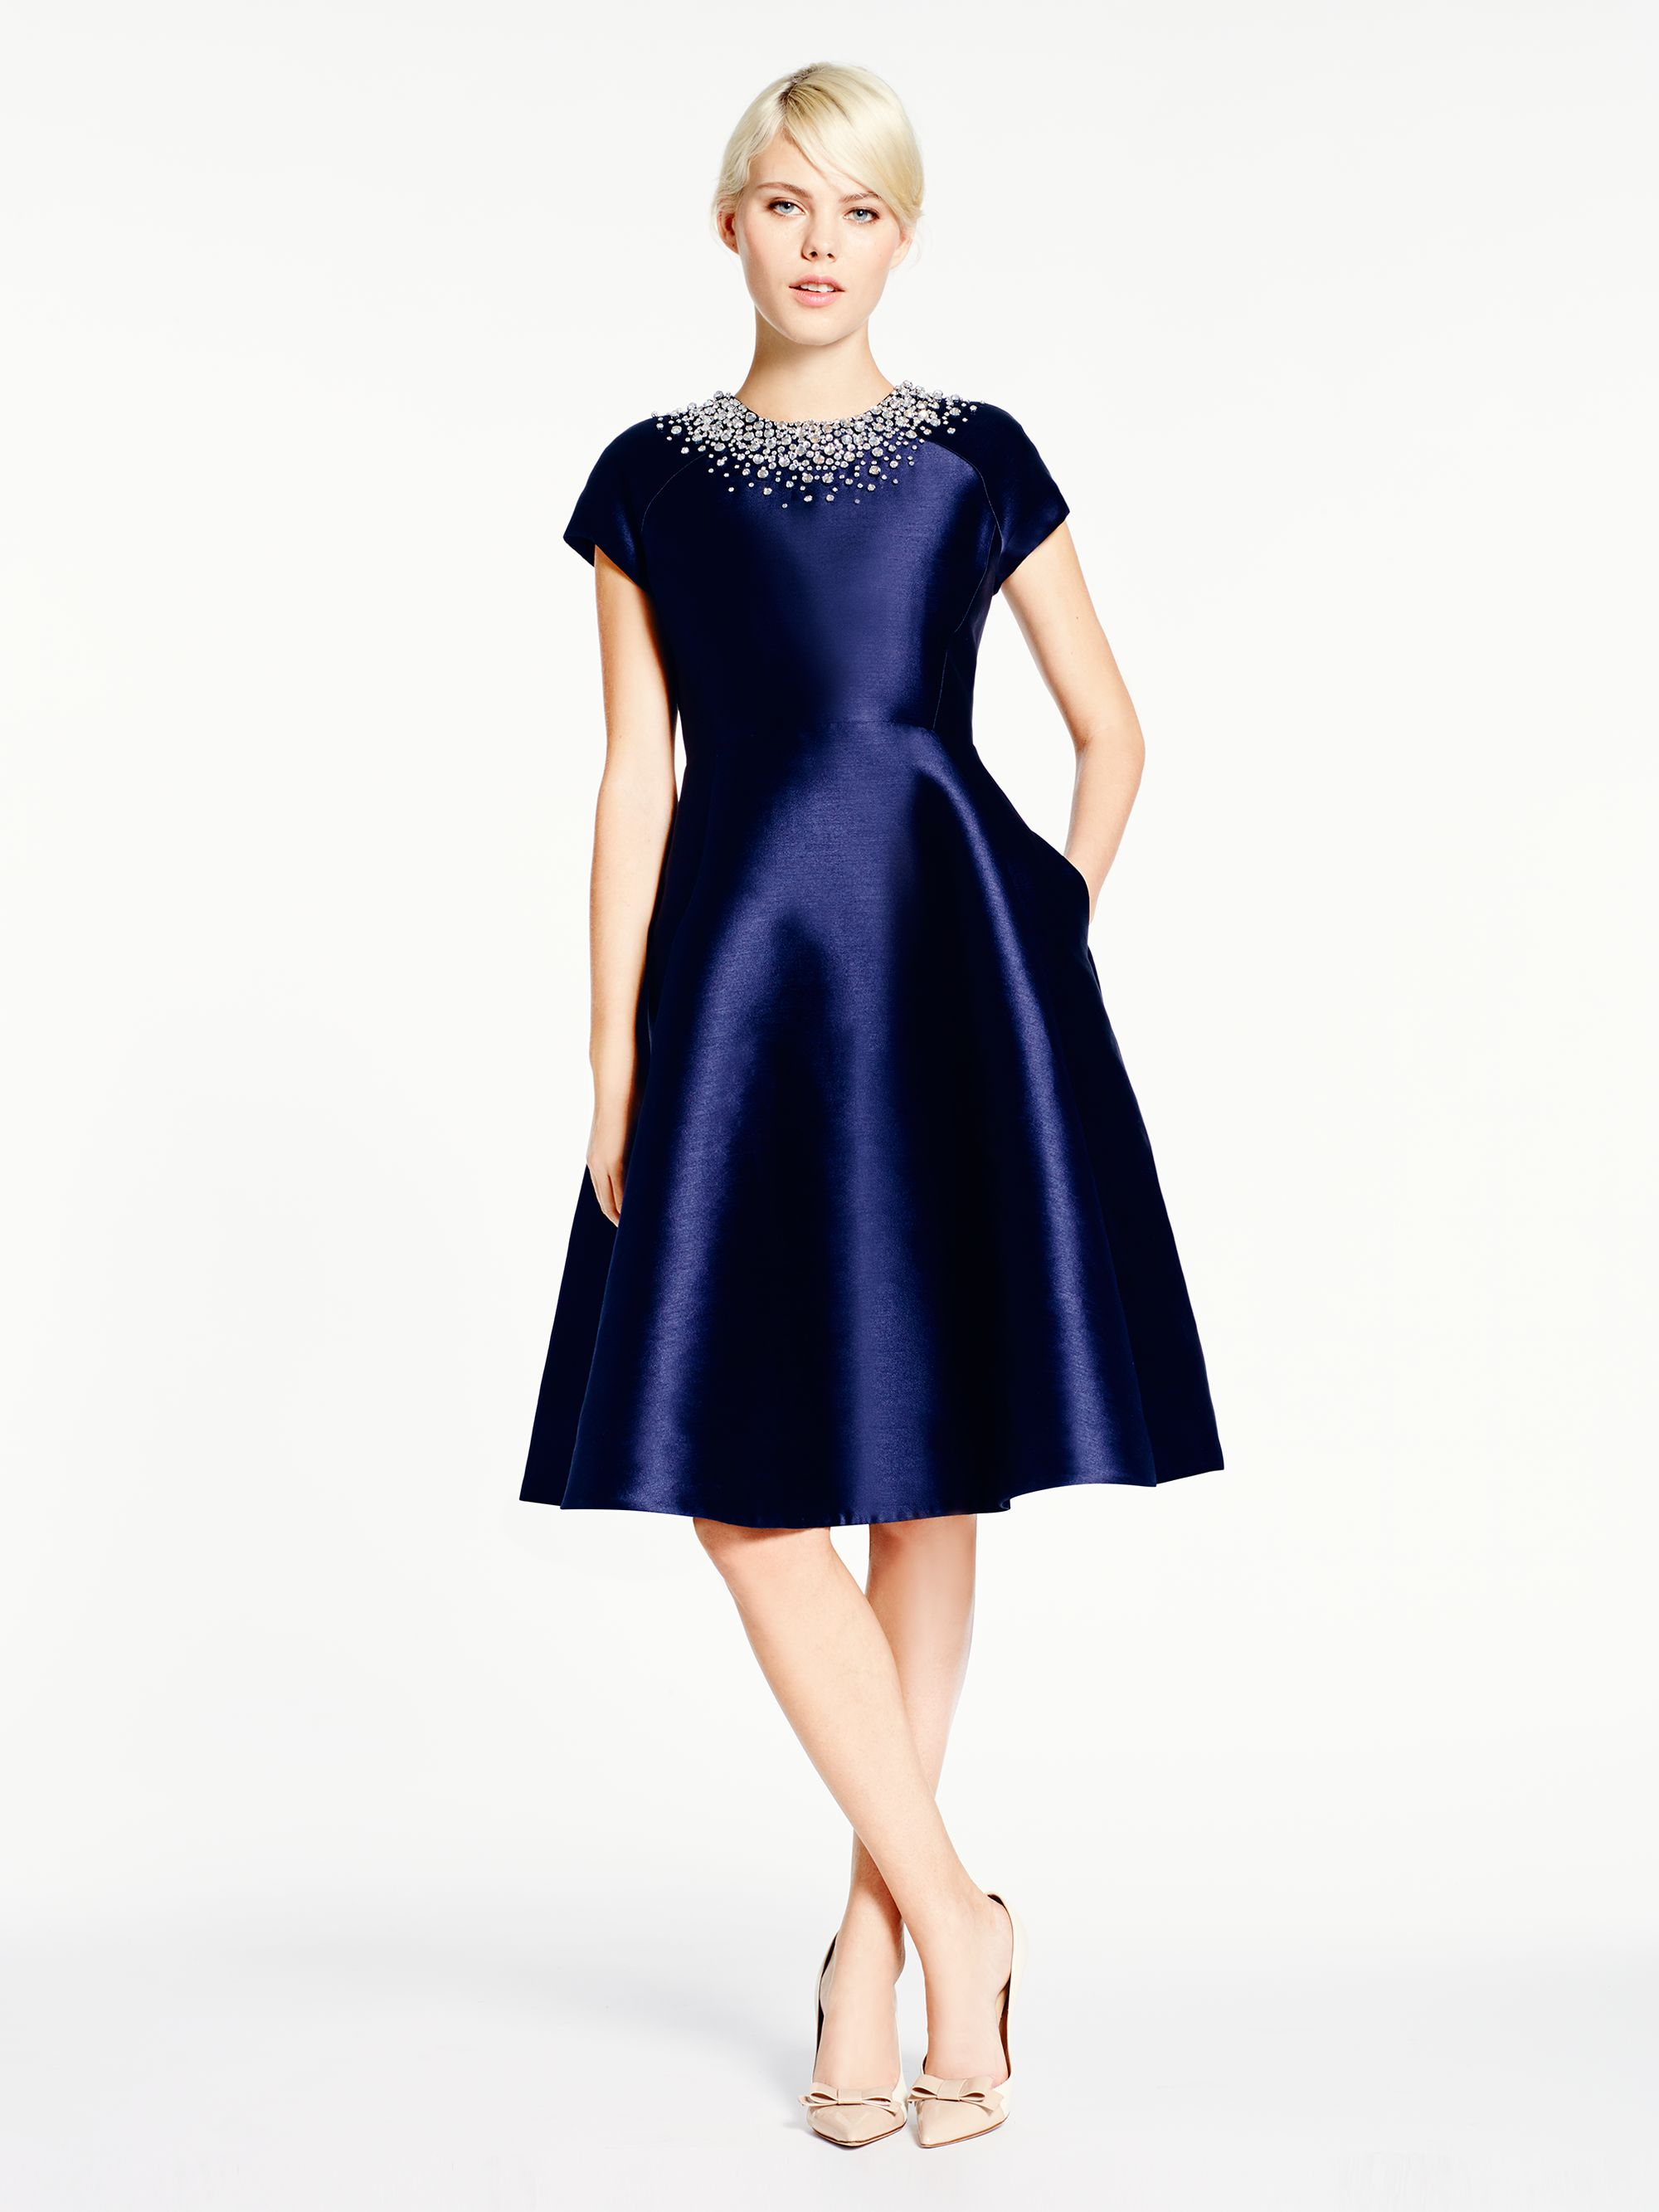 Lyst - Kate Spade New York Madison Ave. Collection Alixi Dress in Blue